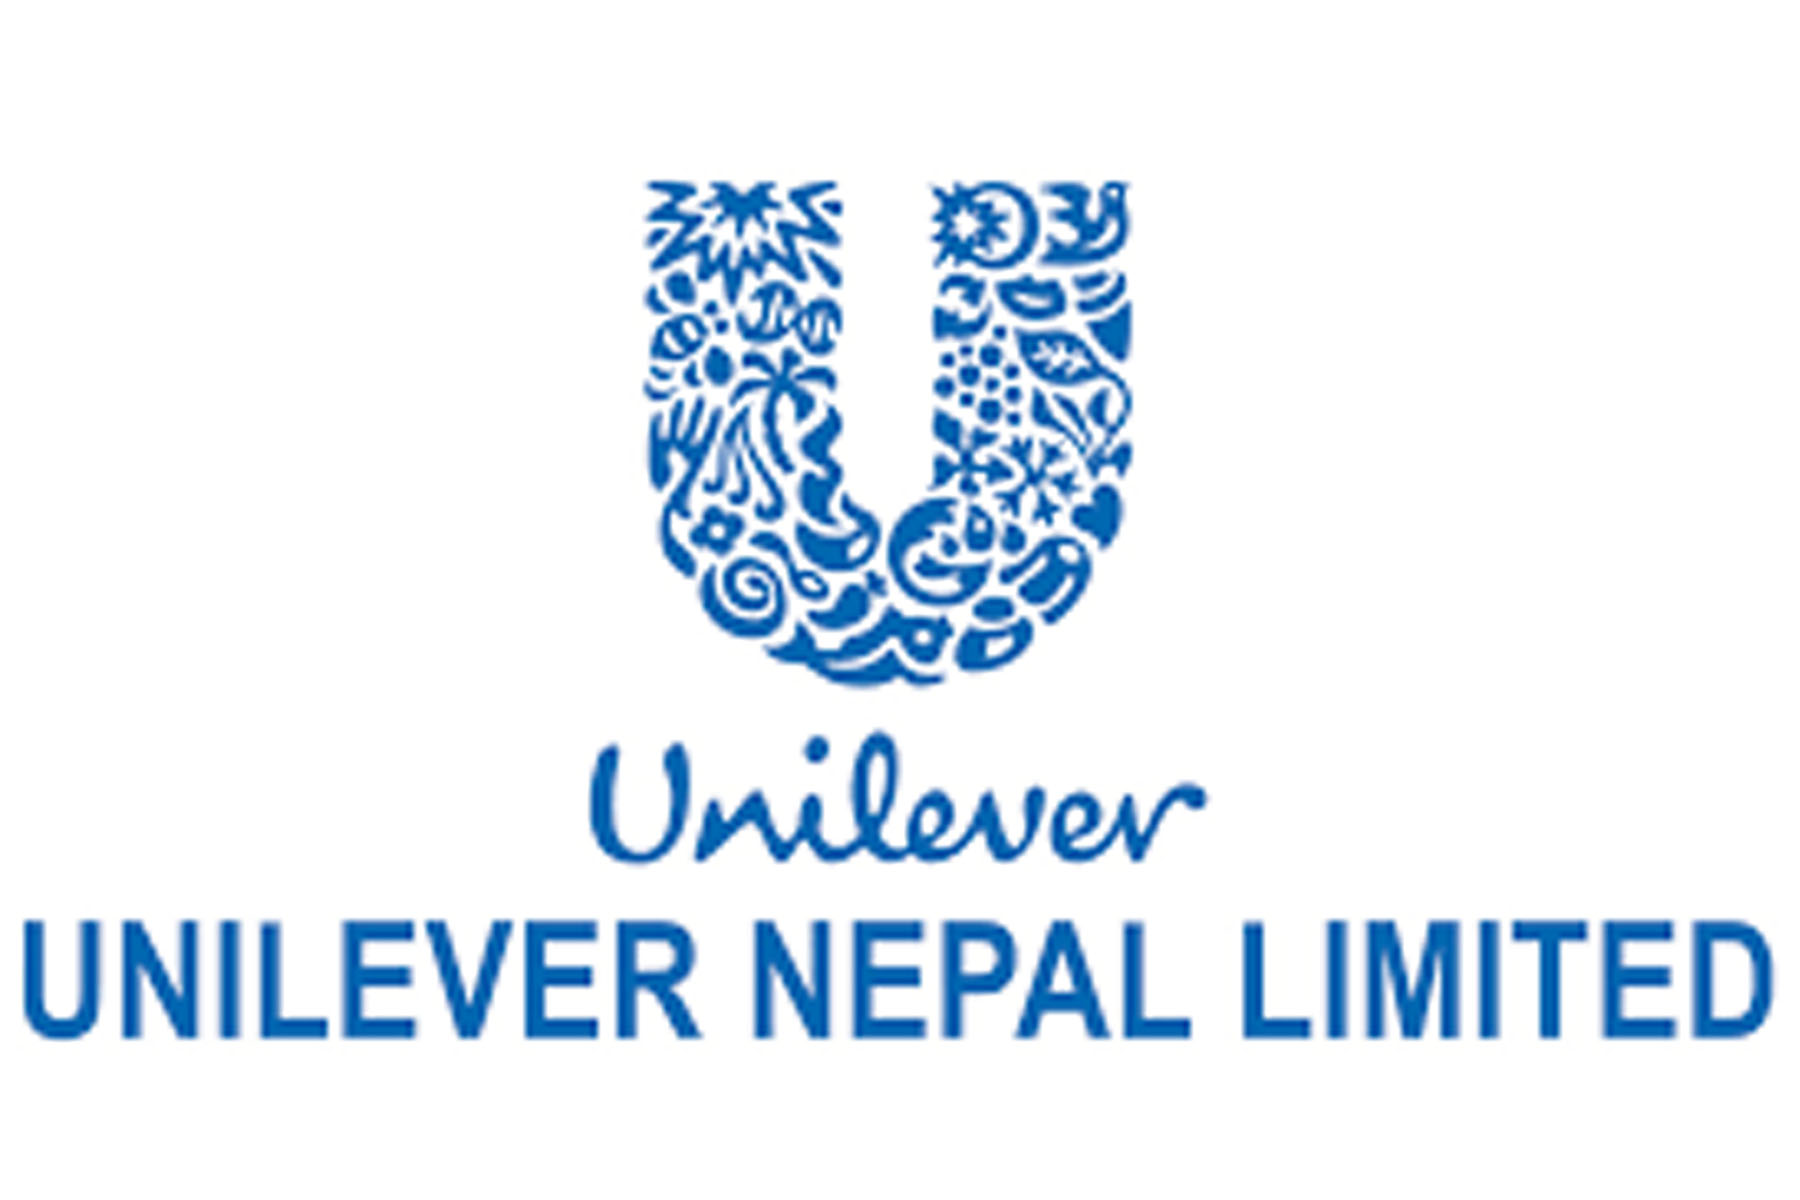 Unilever Nepal Becomes 1st Company to Trade above Rs 50,000 per unit